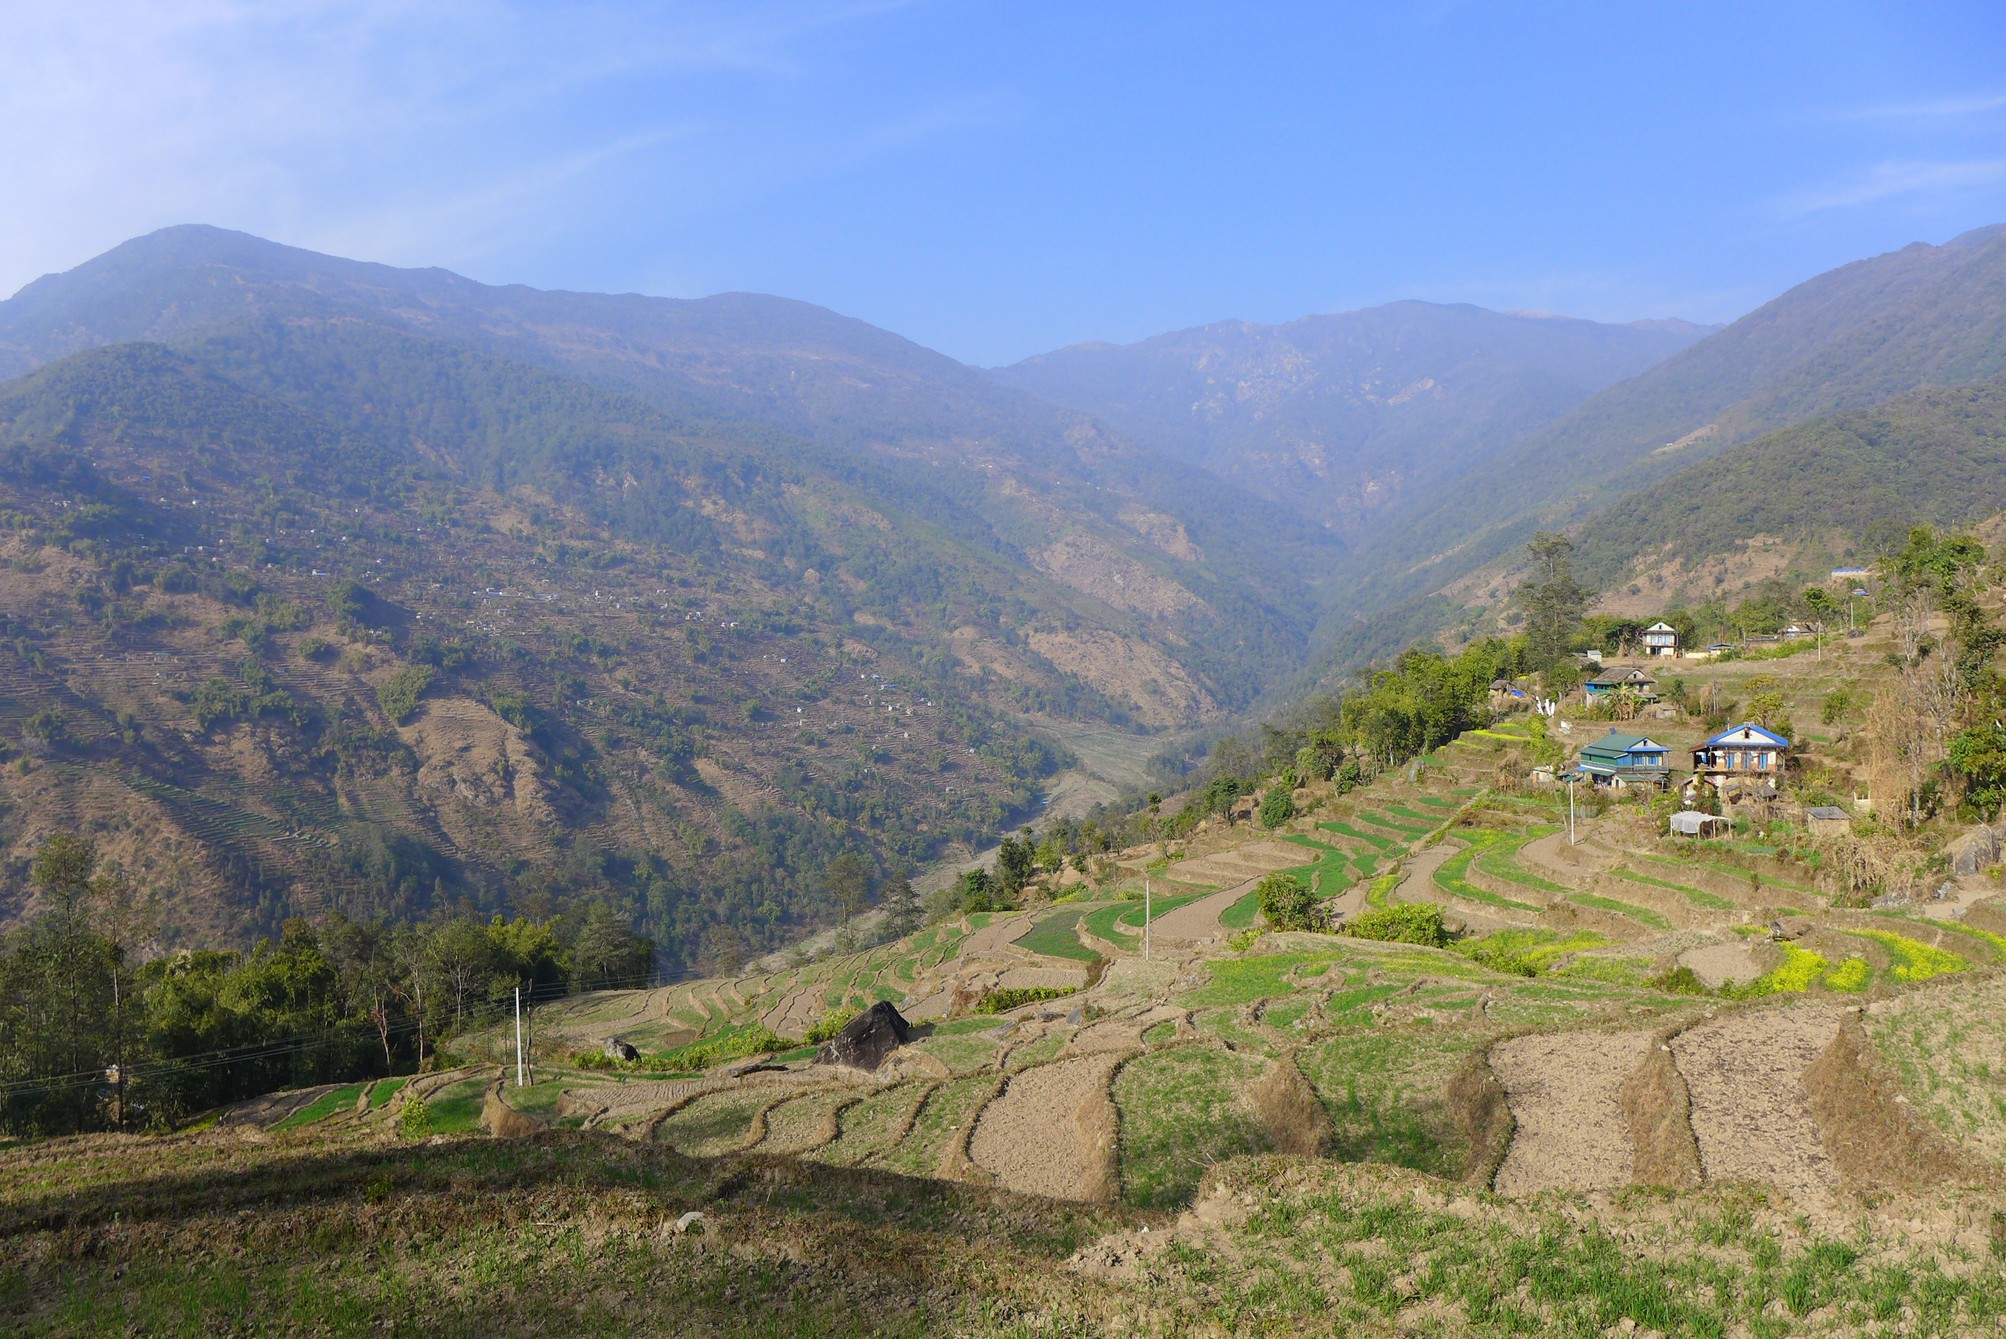 The Lidim river valley forms the center of the Nachiring speaking area